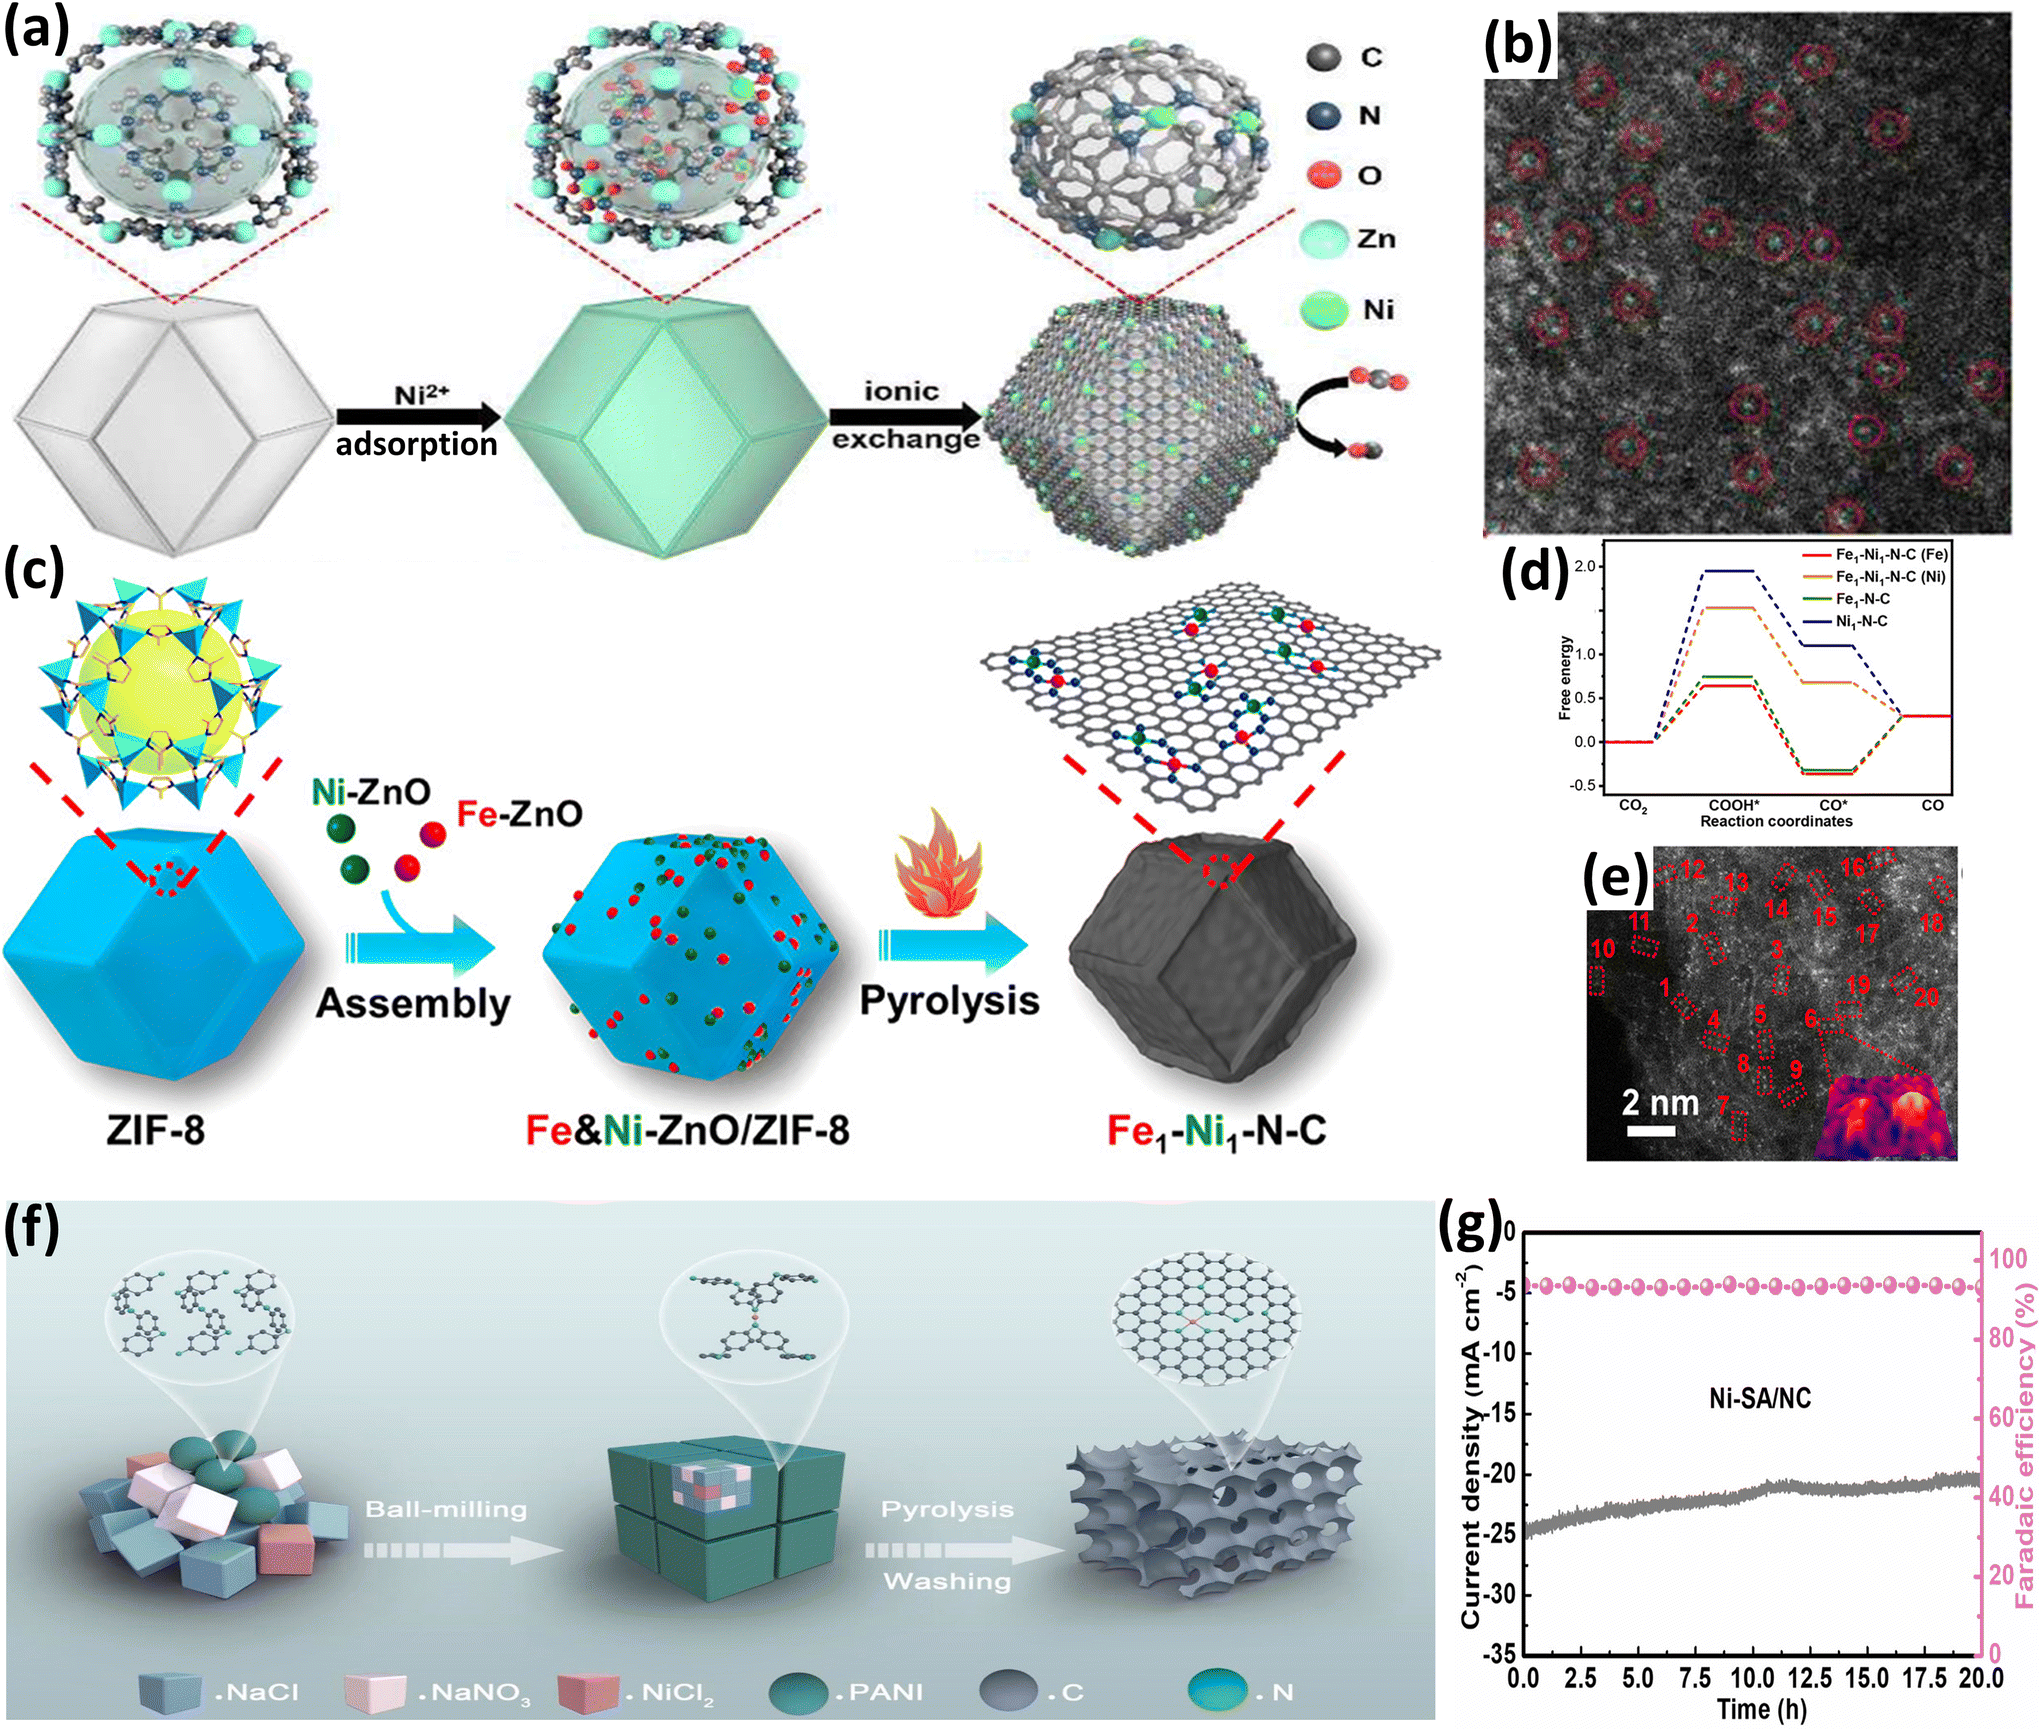 Emerging materials for electrochemical CO 2 reduction: progress and  optimization strategies of carbon-based single-atom catalysts - Nanoscale  (RSC Publishing) DOI:10.1039/D2NR06190B